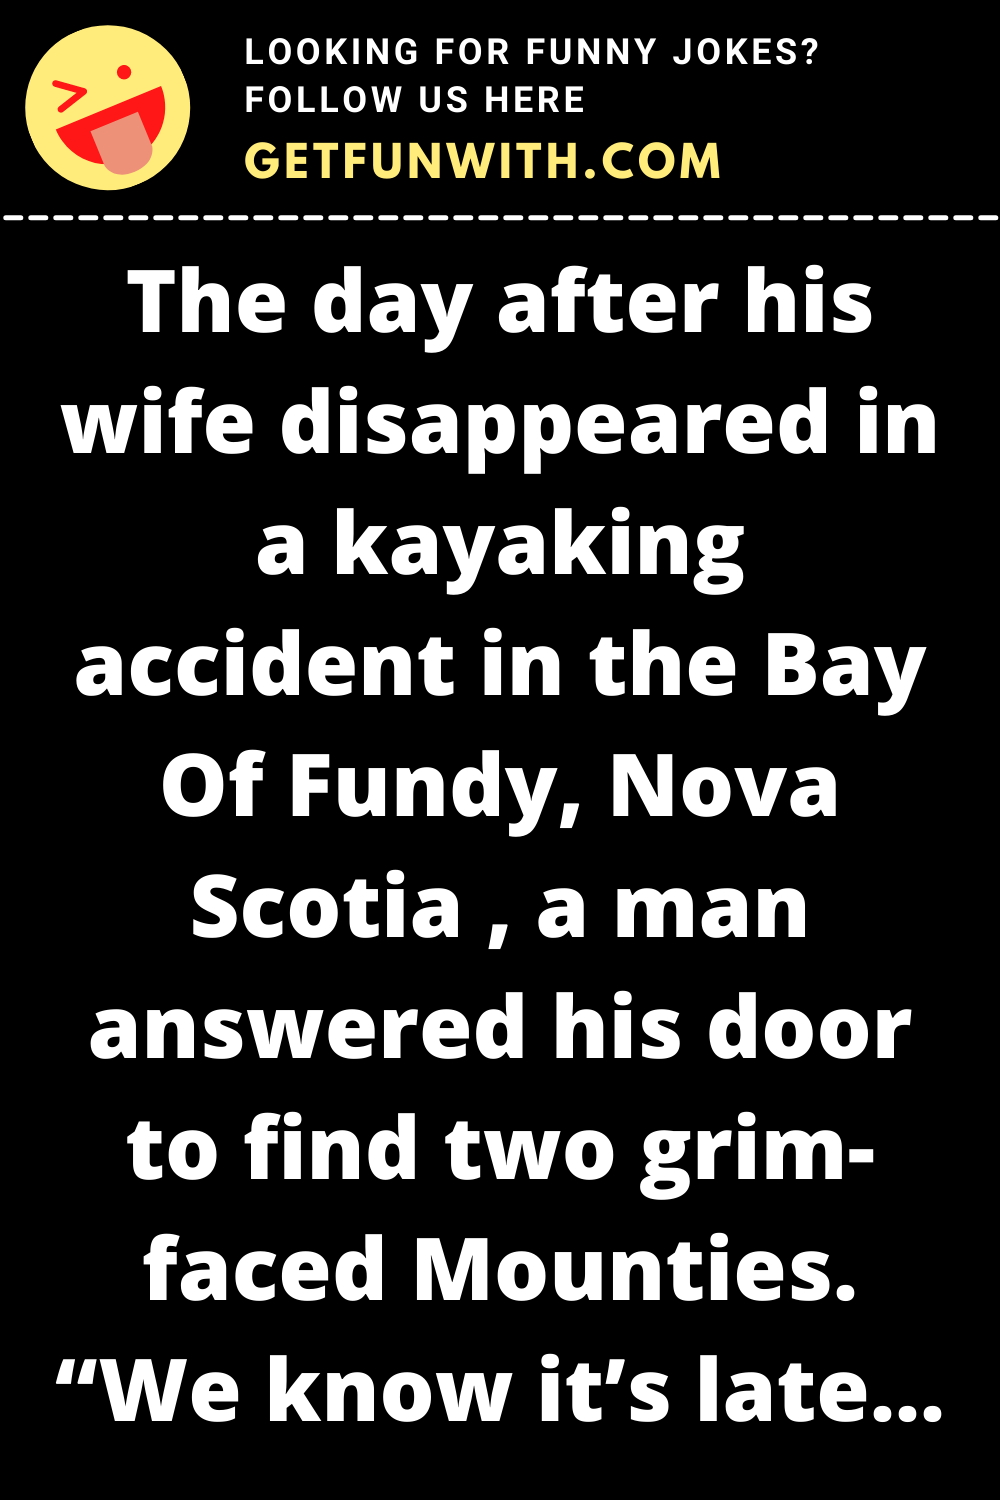 The day after his wife disappeared in a kayaking accident in the Bay Of Fundy, Nova Scotia , a man answered his door to find two grim-faced Mounties. "We know it's late, sir, but we have some information about your wife," said one of the Mounties.